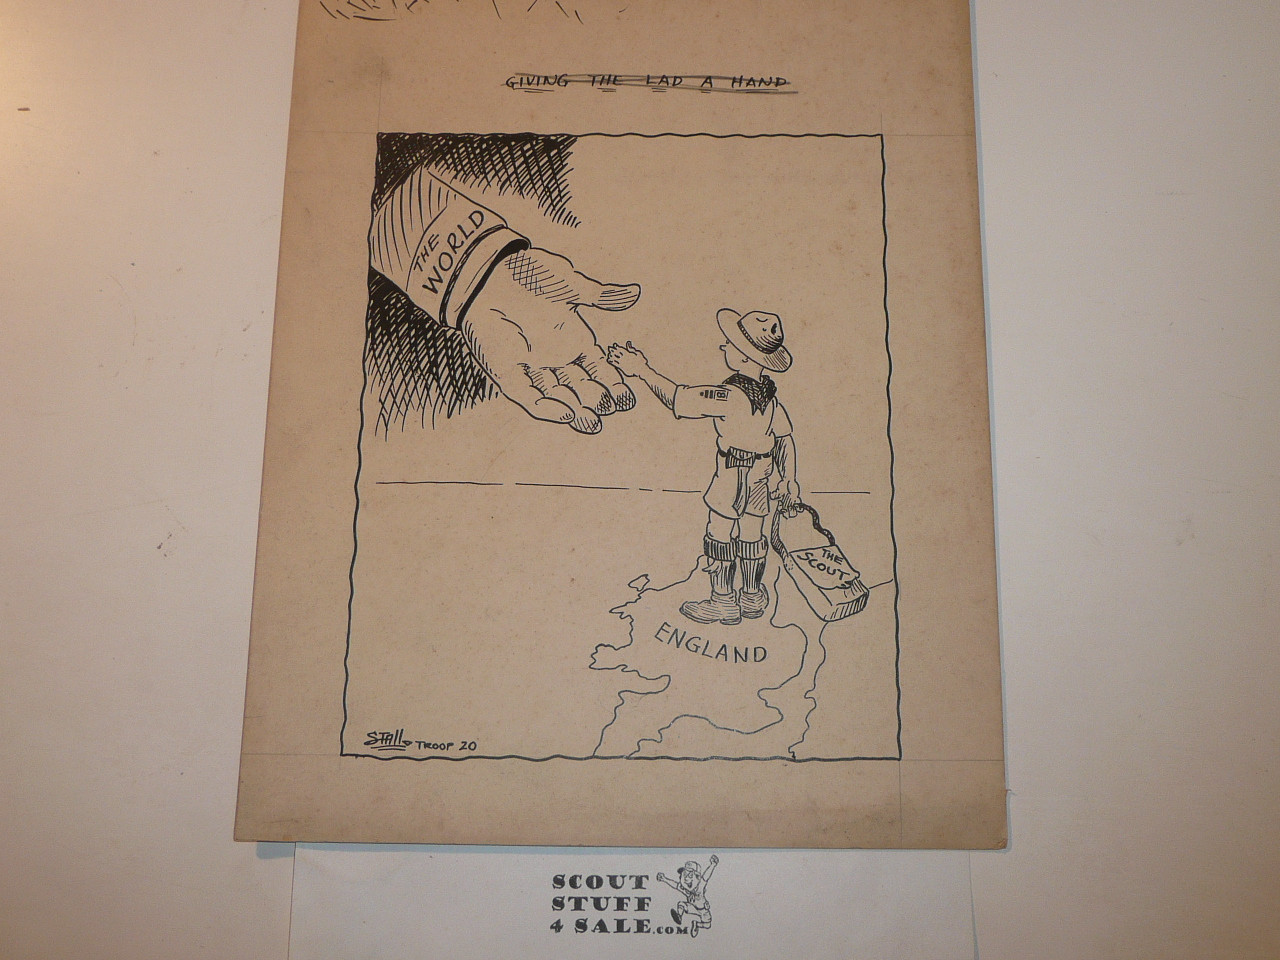 1929 World Jamboree Orig. Drawing by Newton Stall, published Artist, USA Contingent, "Giving the Lad a Hand"  Measures 12" H x 10" W.  Newton was a well known Artist who also served on Staff at the 1937NJ on the Jamboree Journal